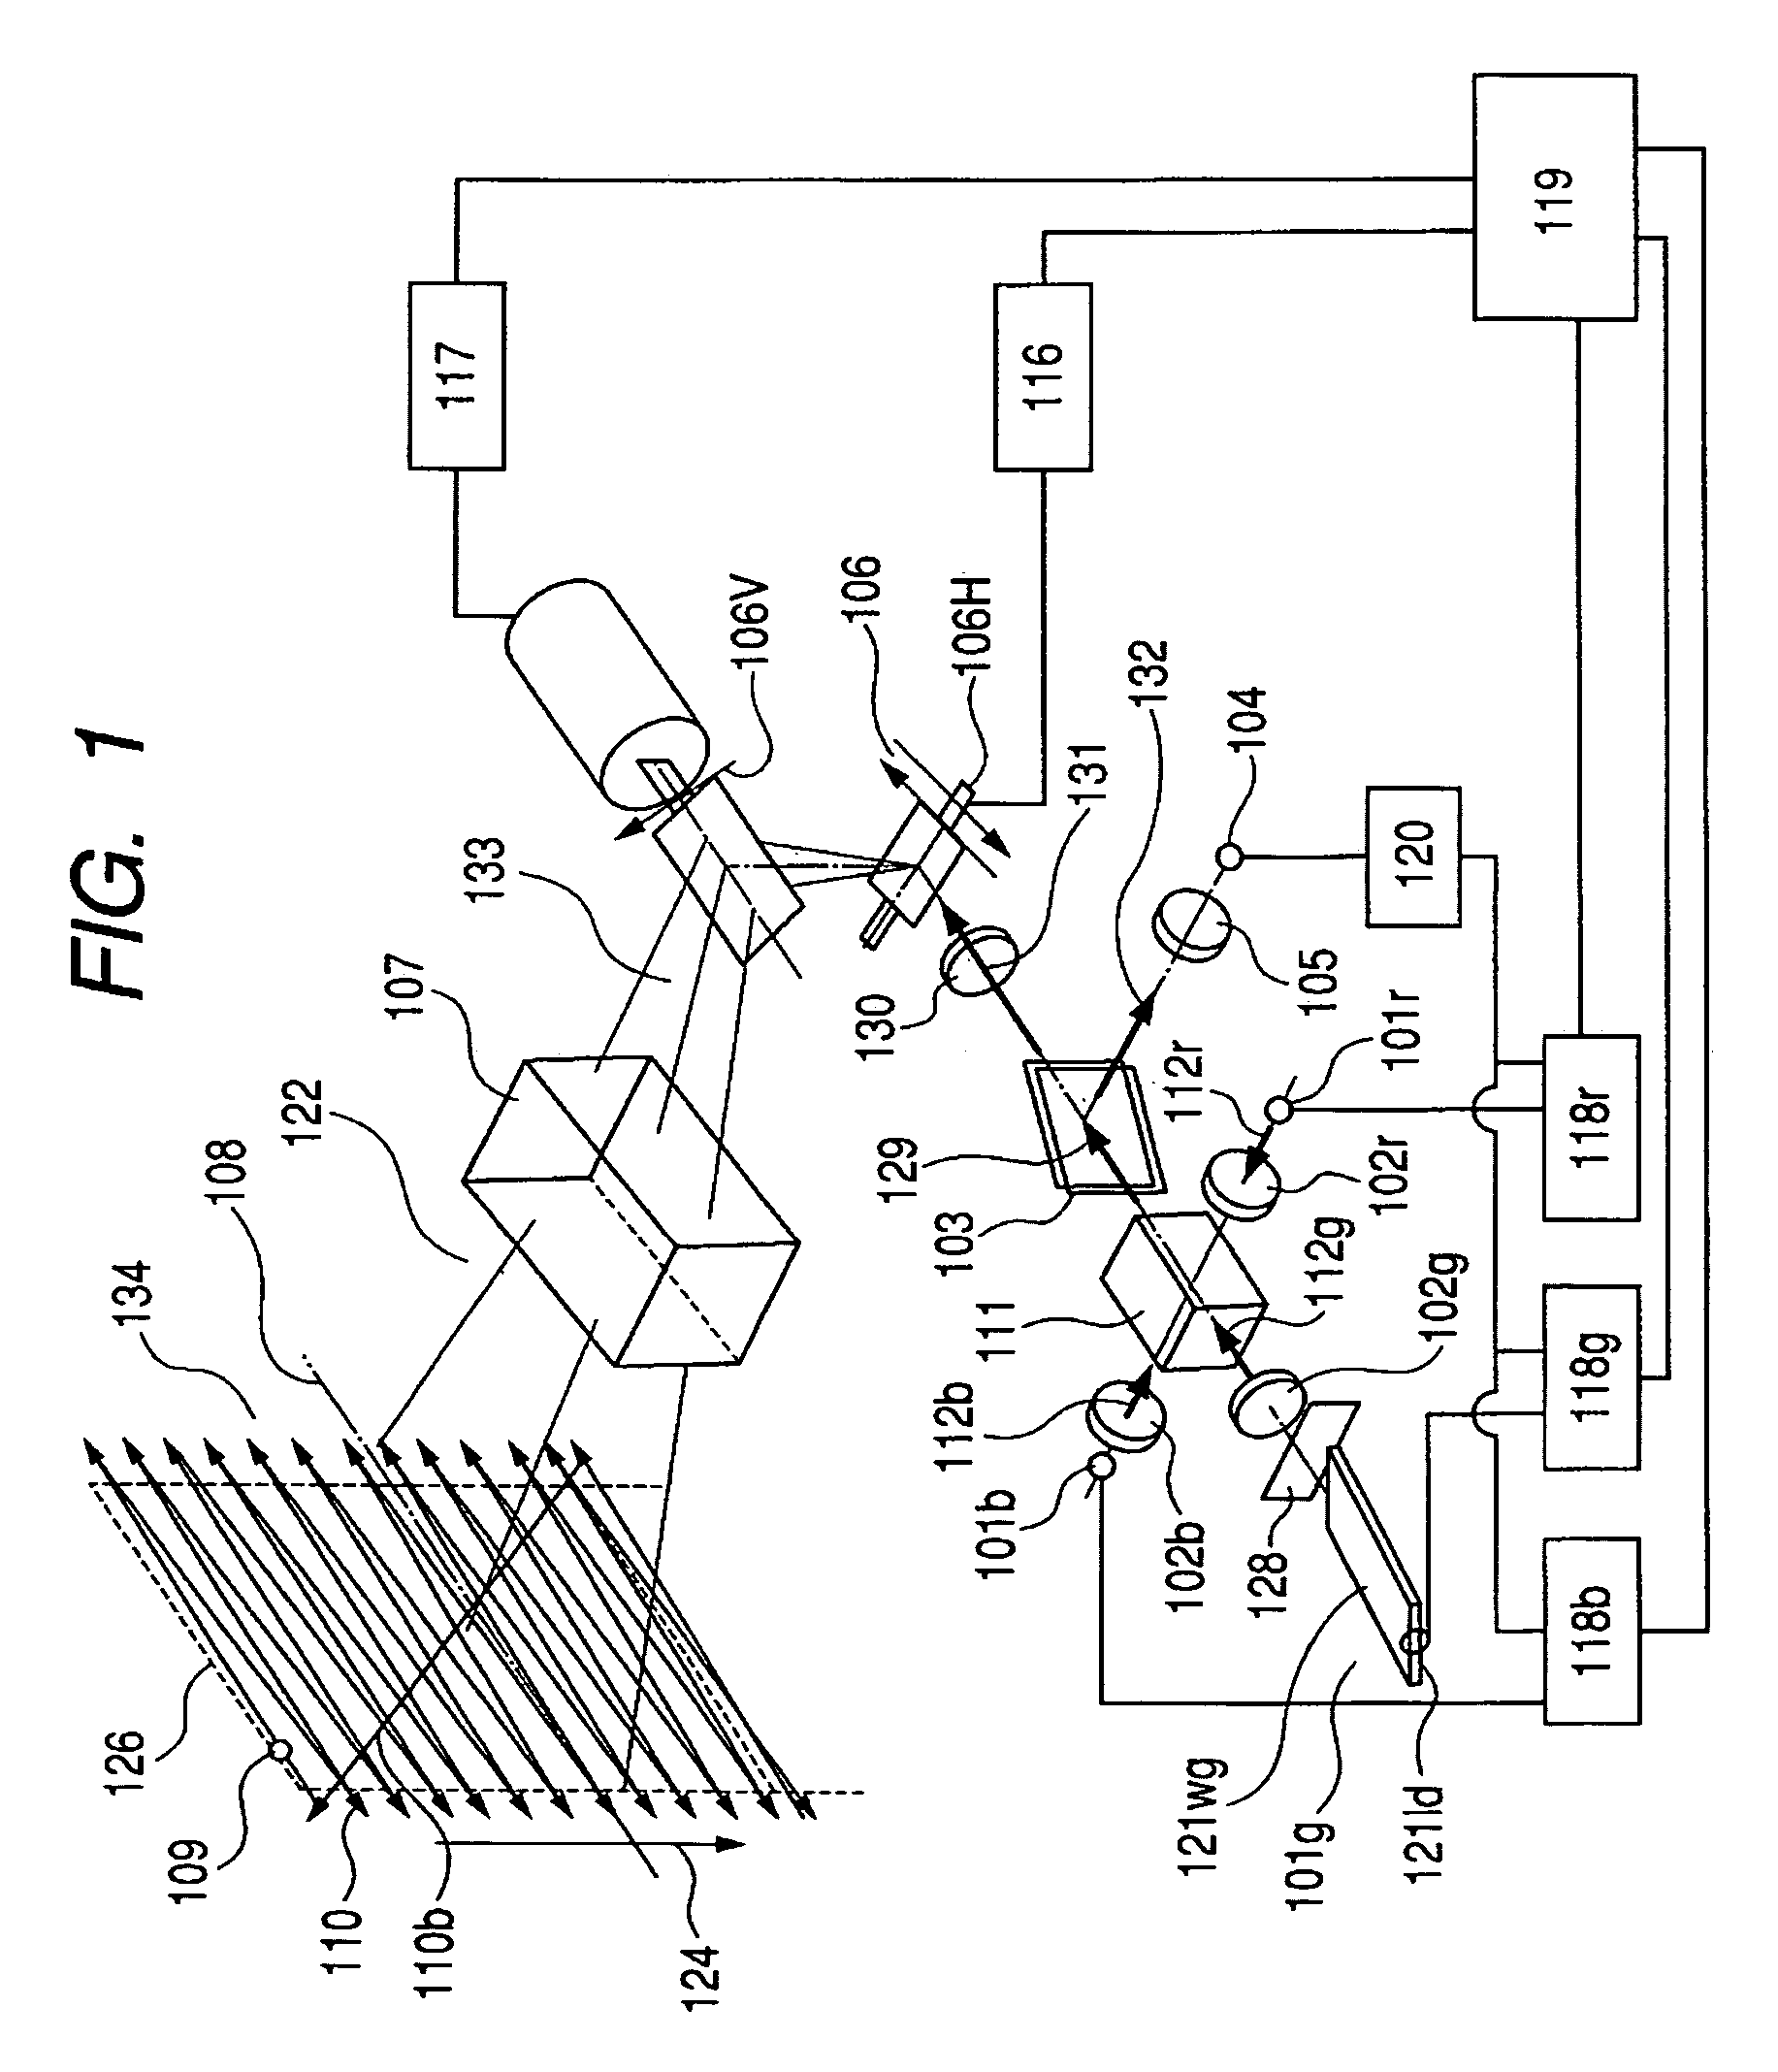 Image displaying apparatus with control over the output ratio of a plurality of light sources